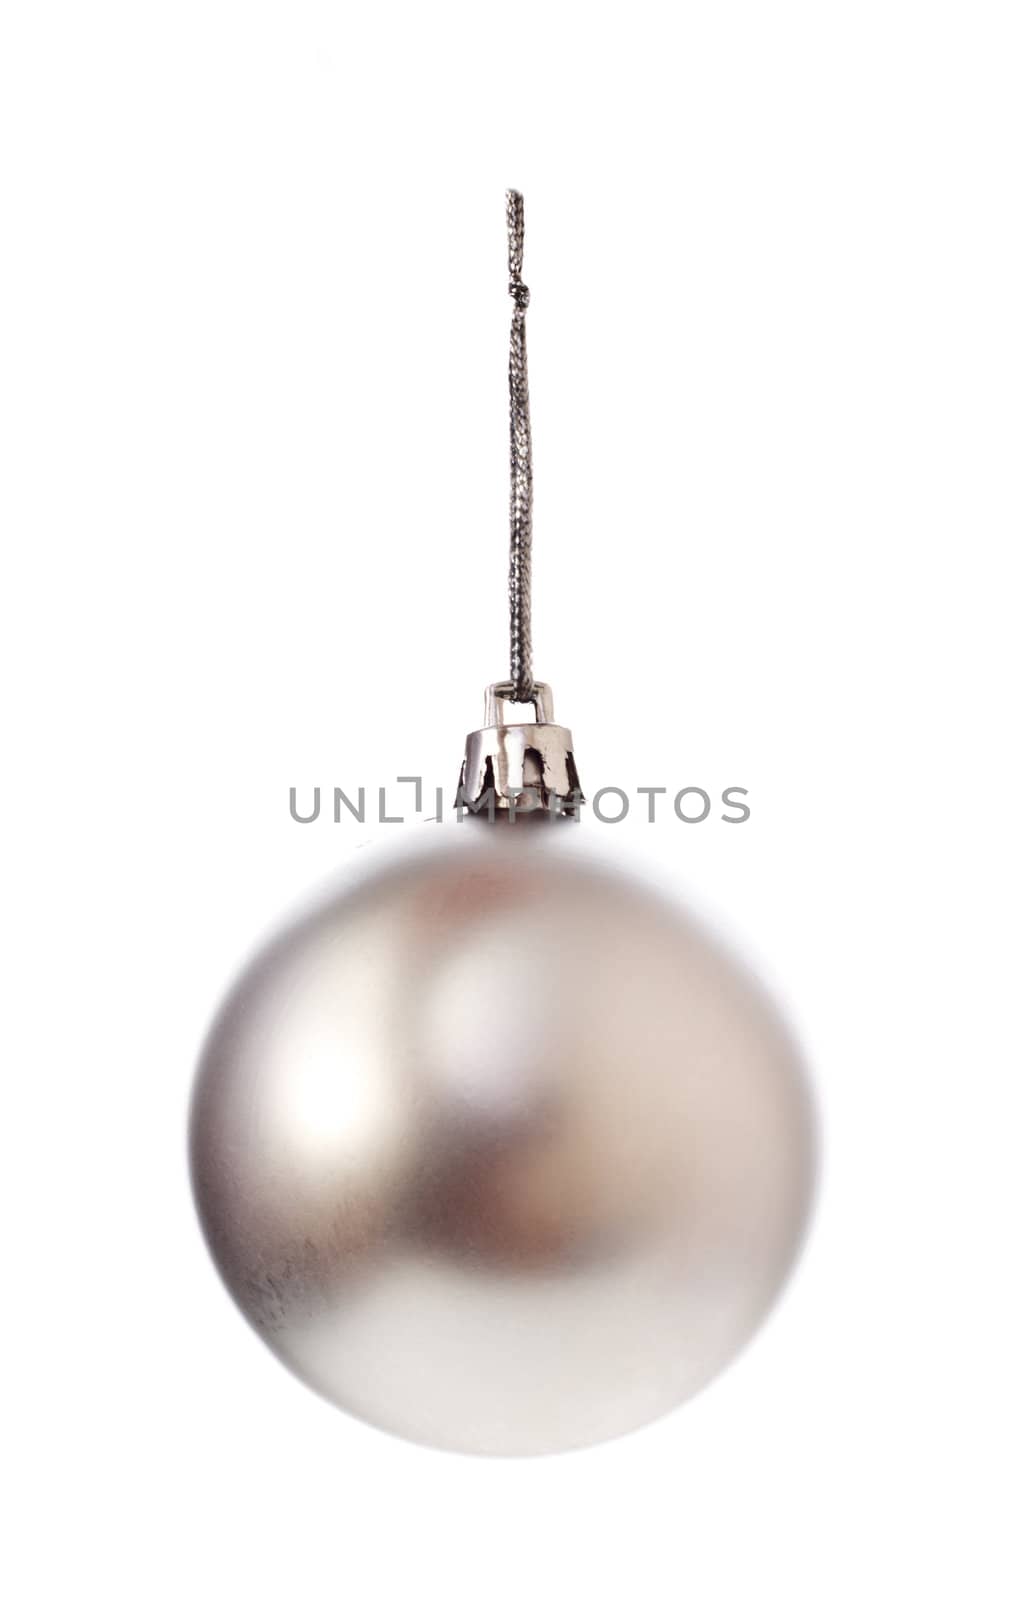 silver christmas ball isolated on white background